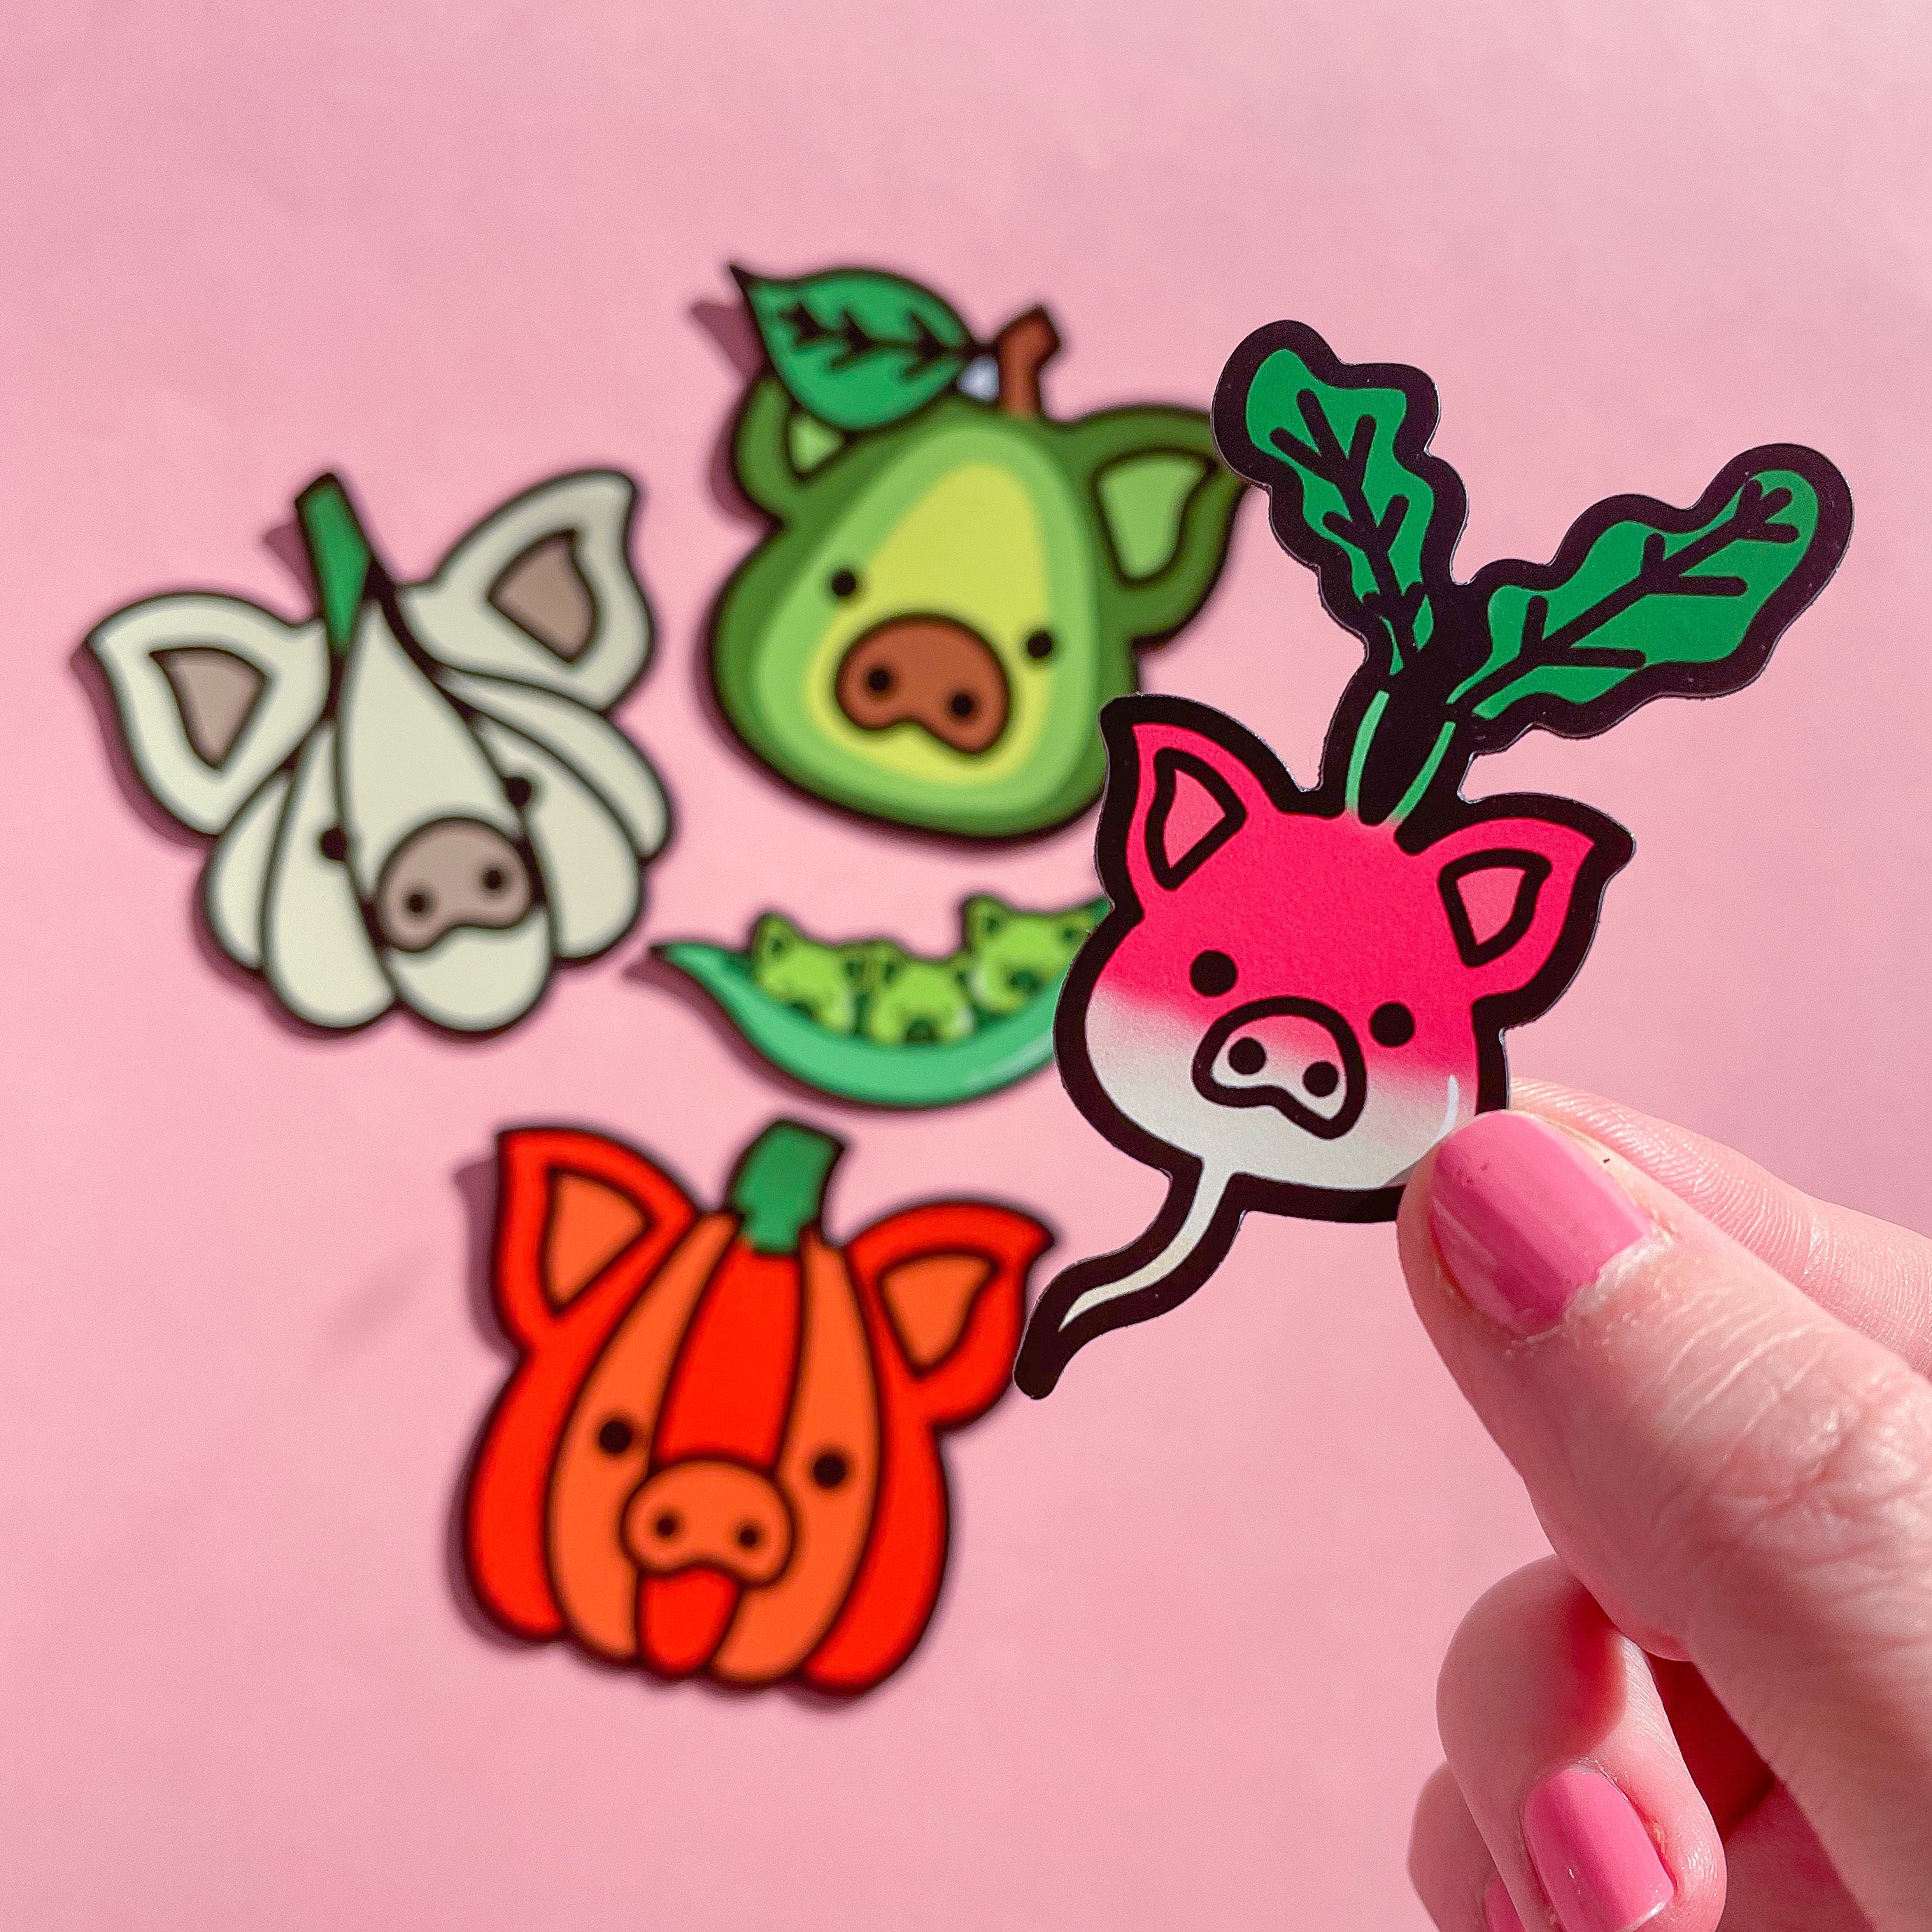 Produce Pigs Fridge Magnets: Pack of 5